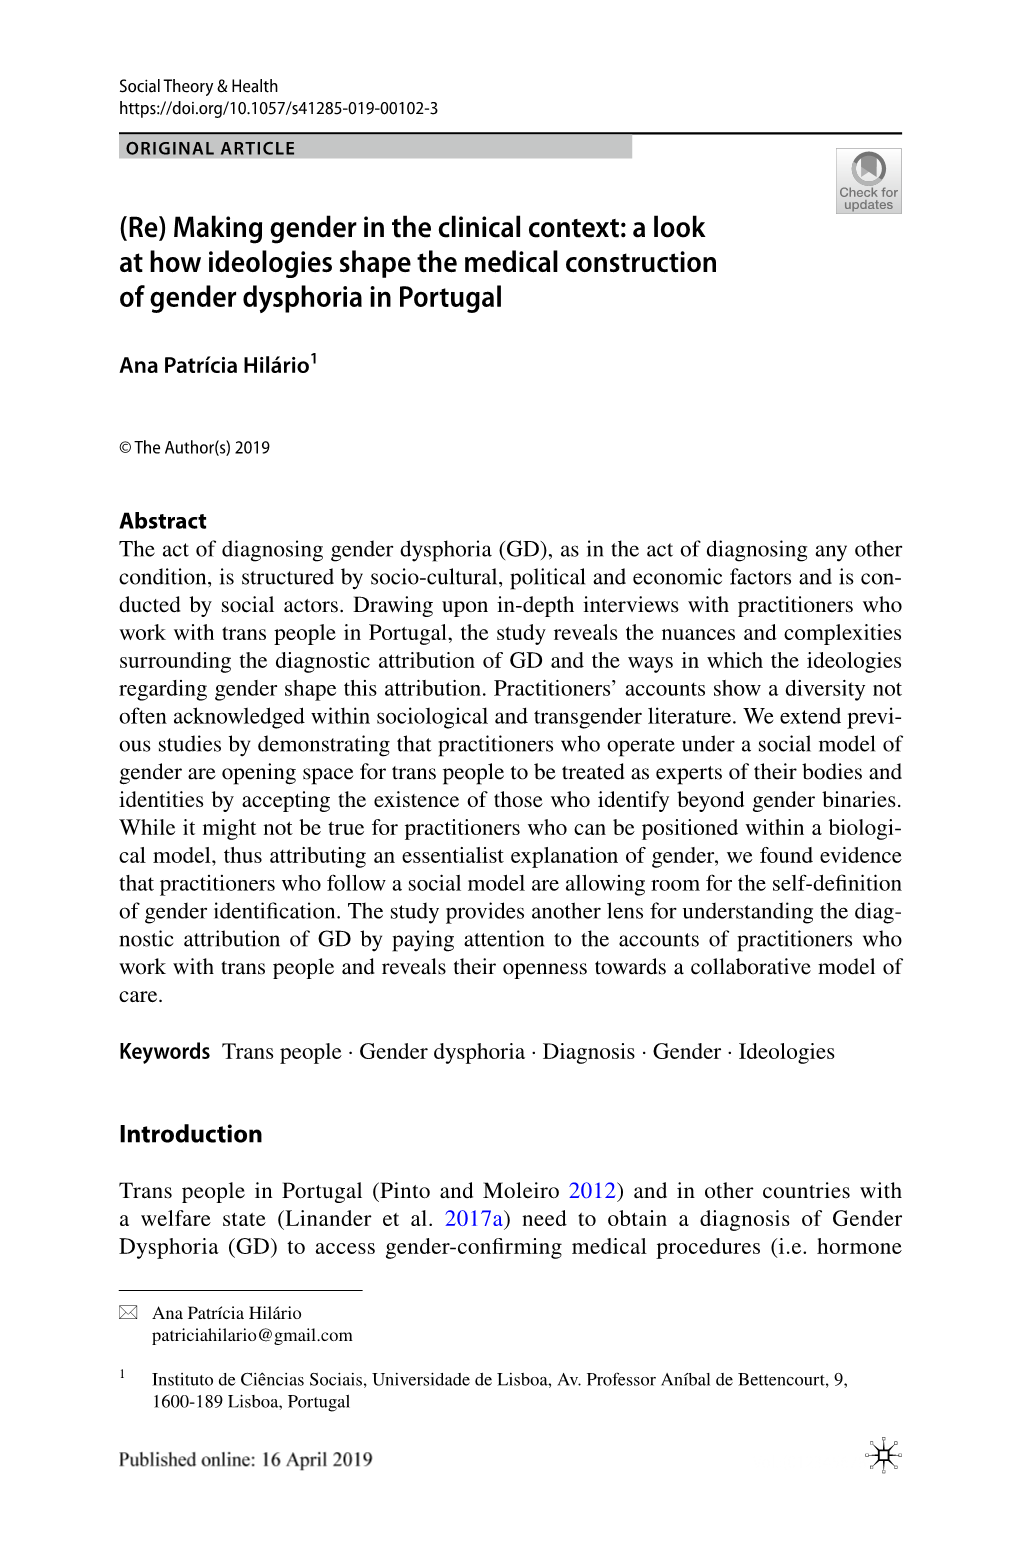 A Look at How Ideologies Shape the Medical Construction of Gender Dysphoria in Portugal